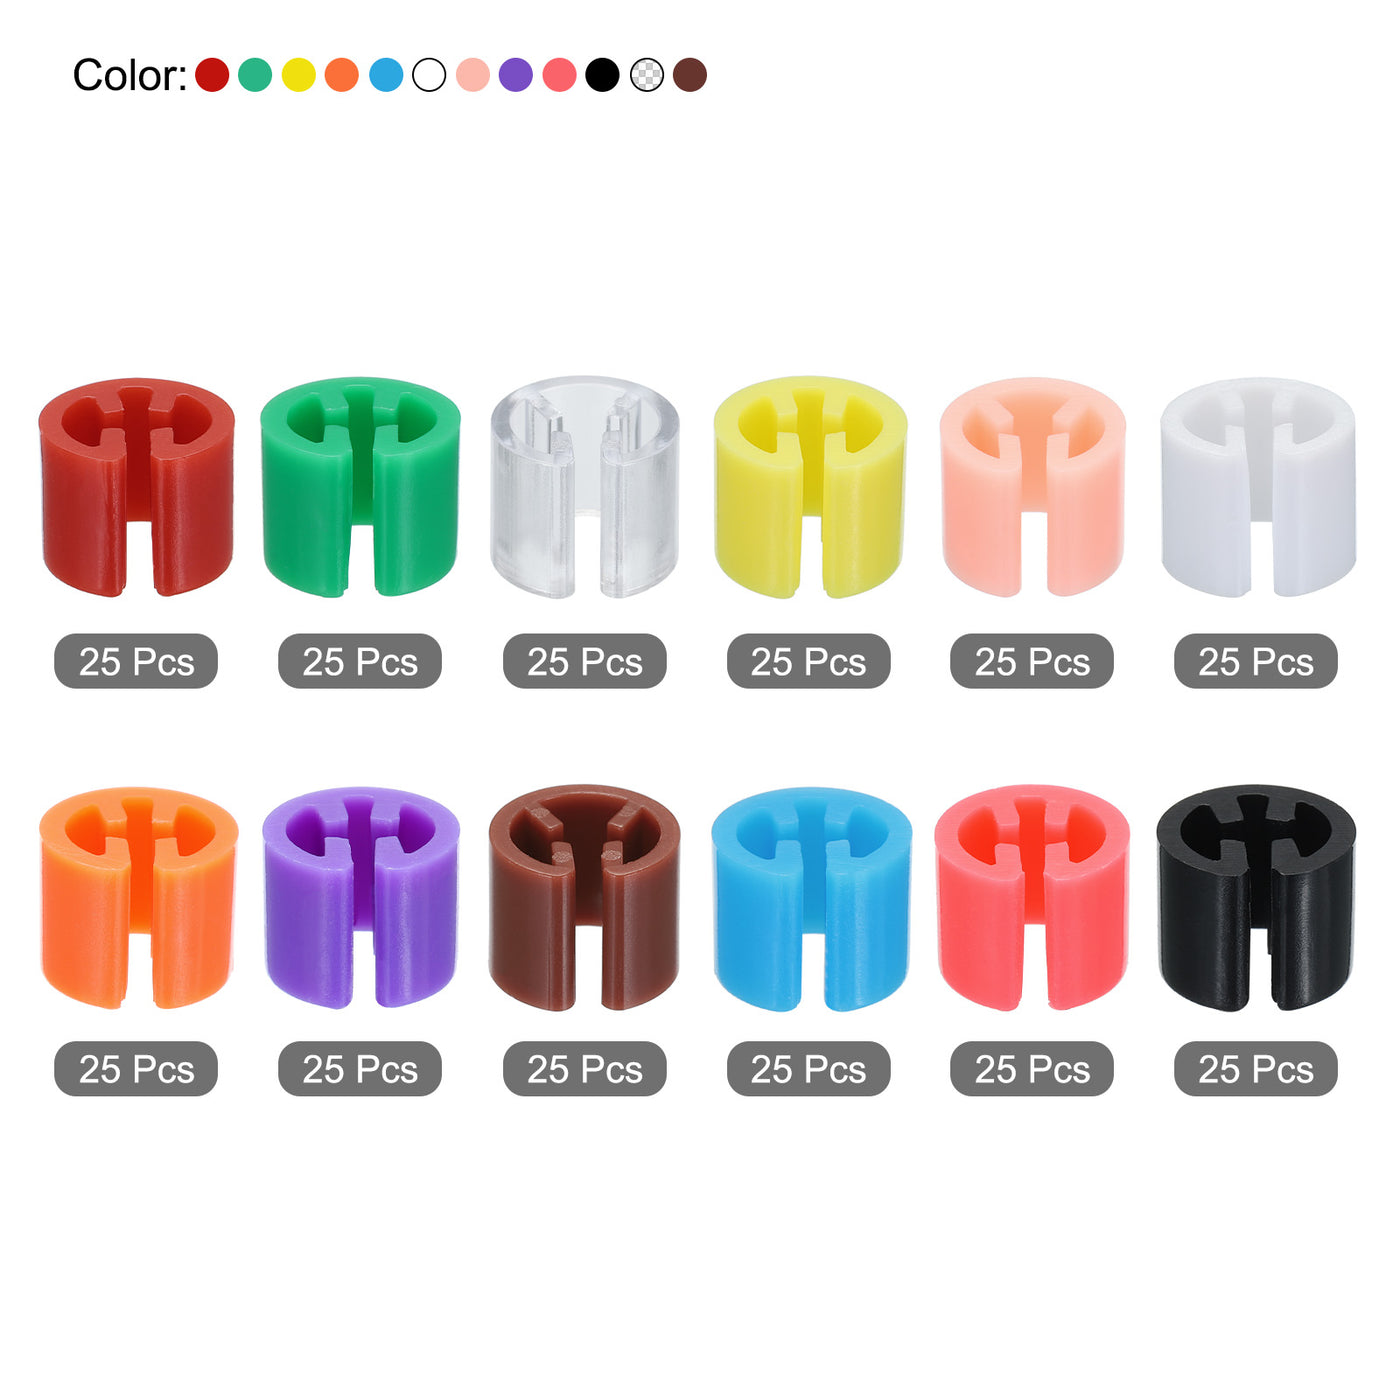 Harfington Clothes Hanger Markers Blank Tags Fit 3.5mm Rod for Garment Color Coding 12 Color, 300pcs